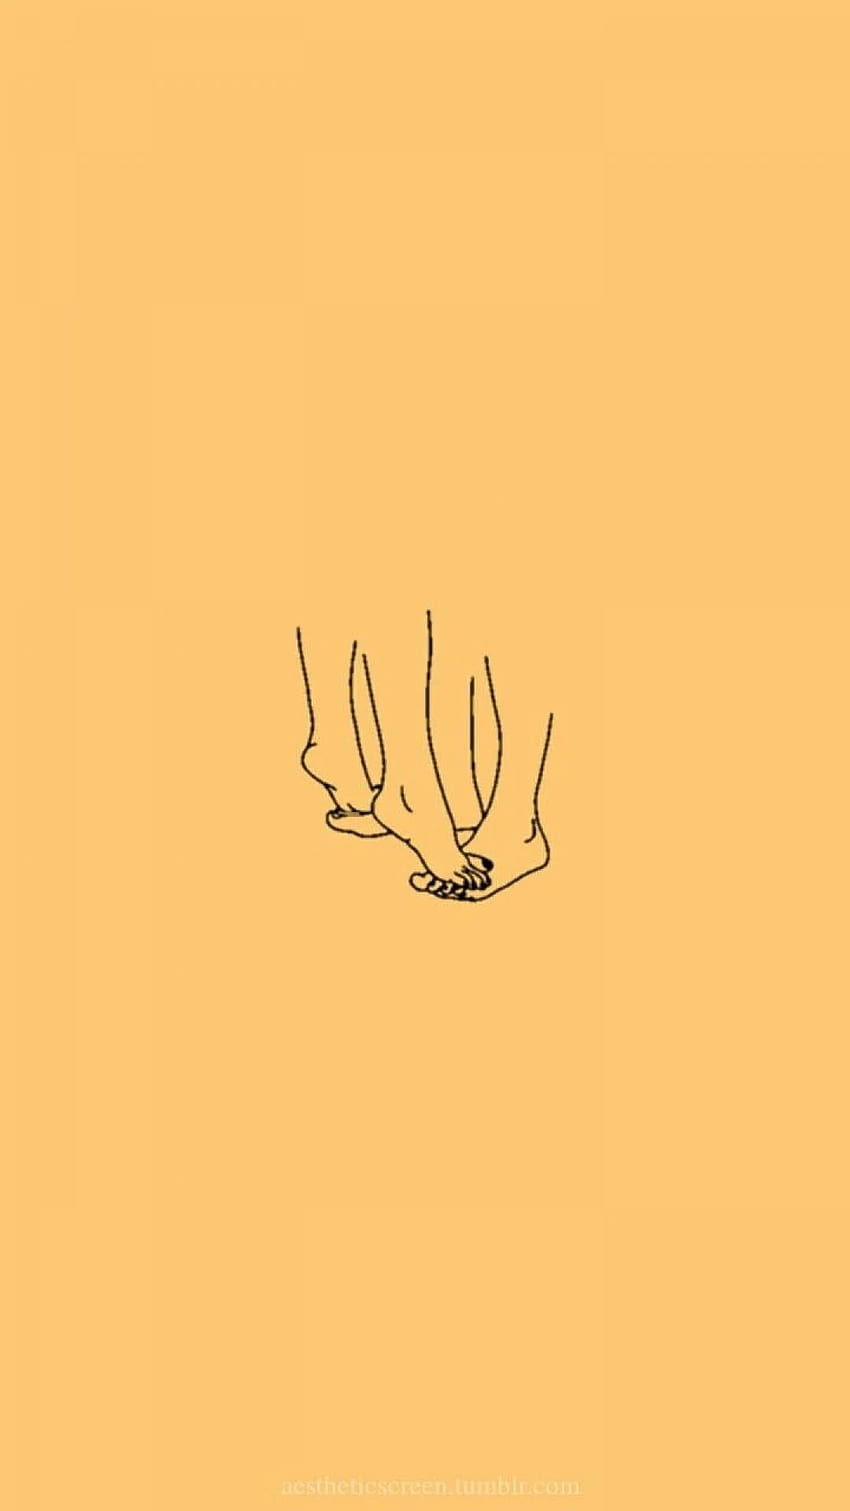 Minimalist aesthetic wallpaper of two hands holding each other - Minimalist